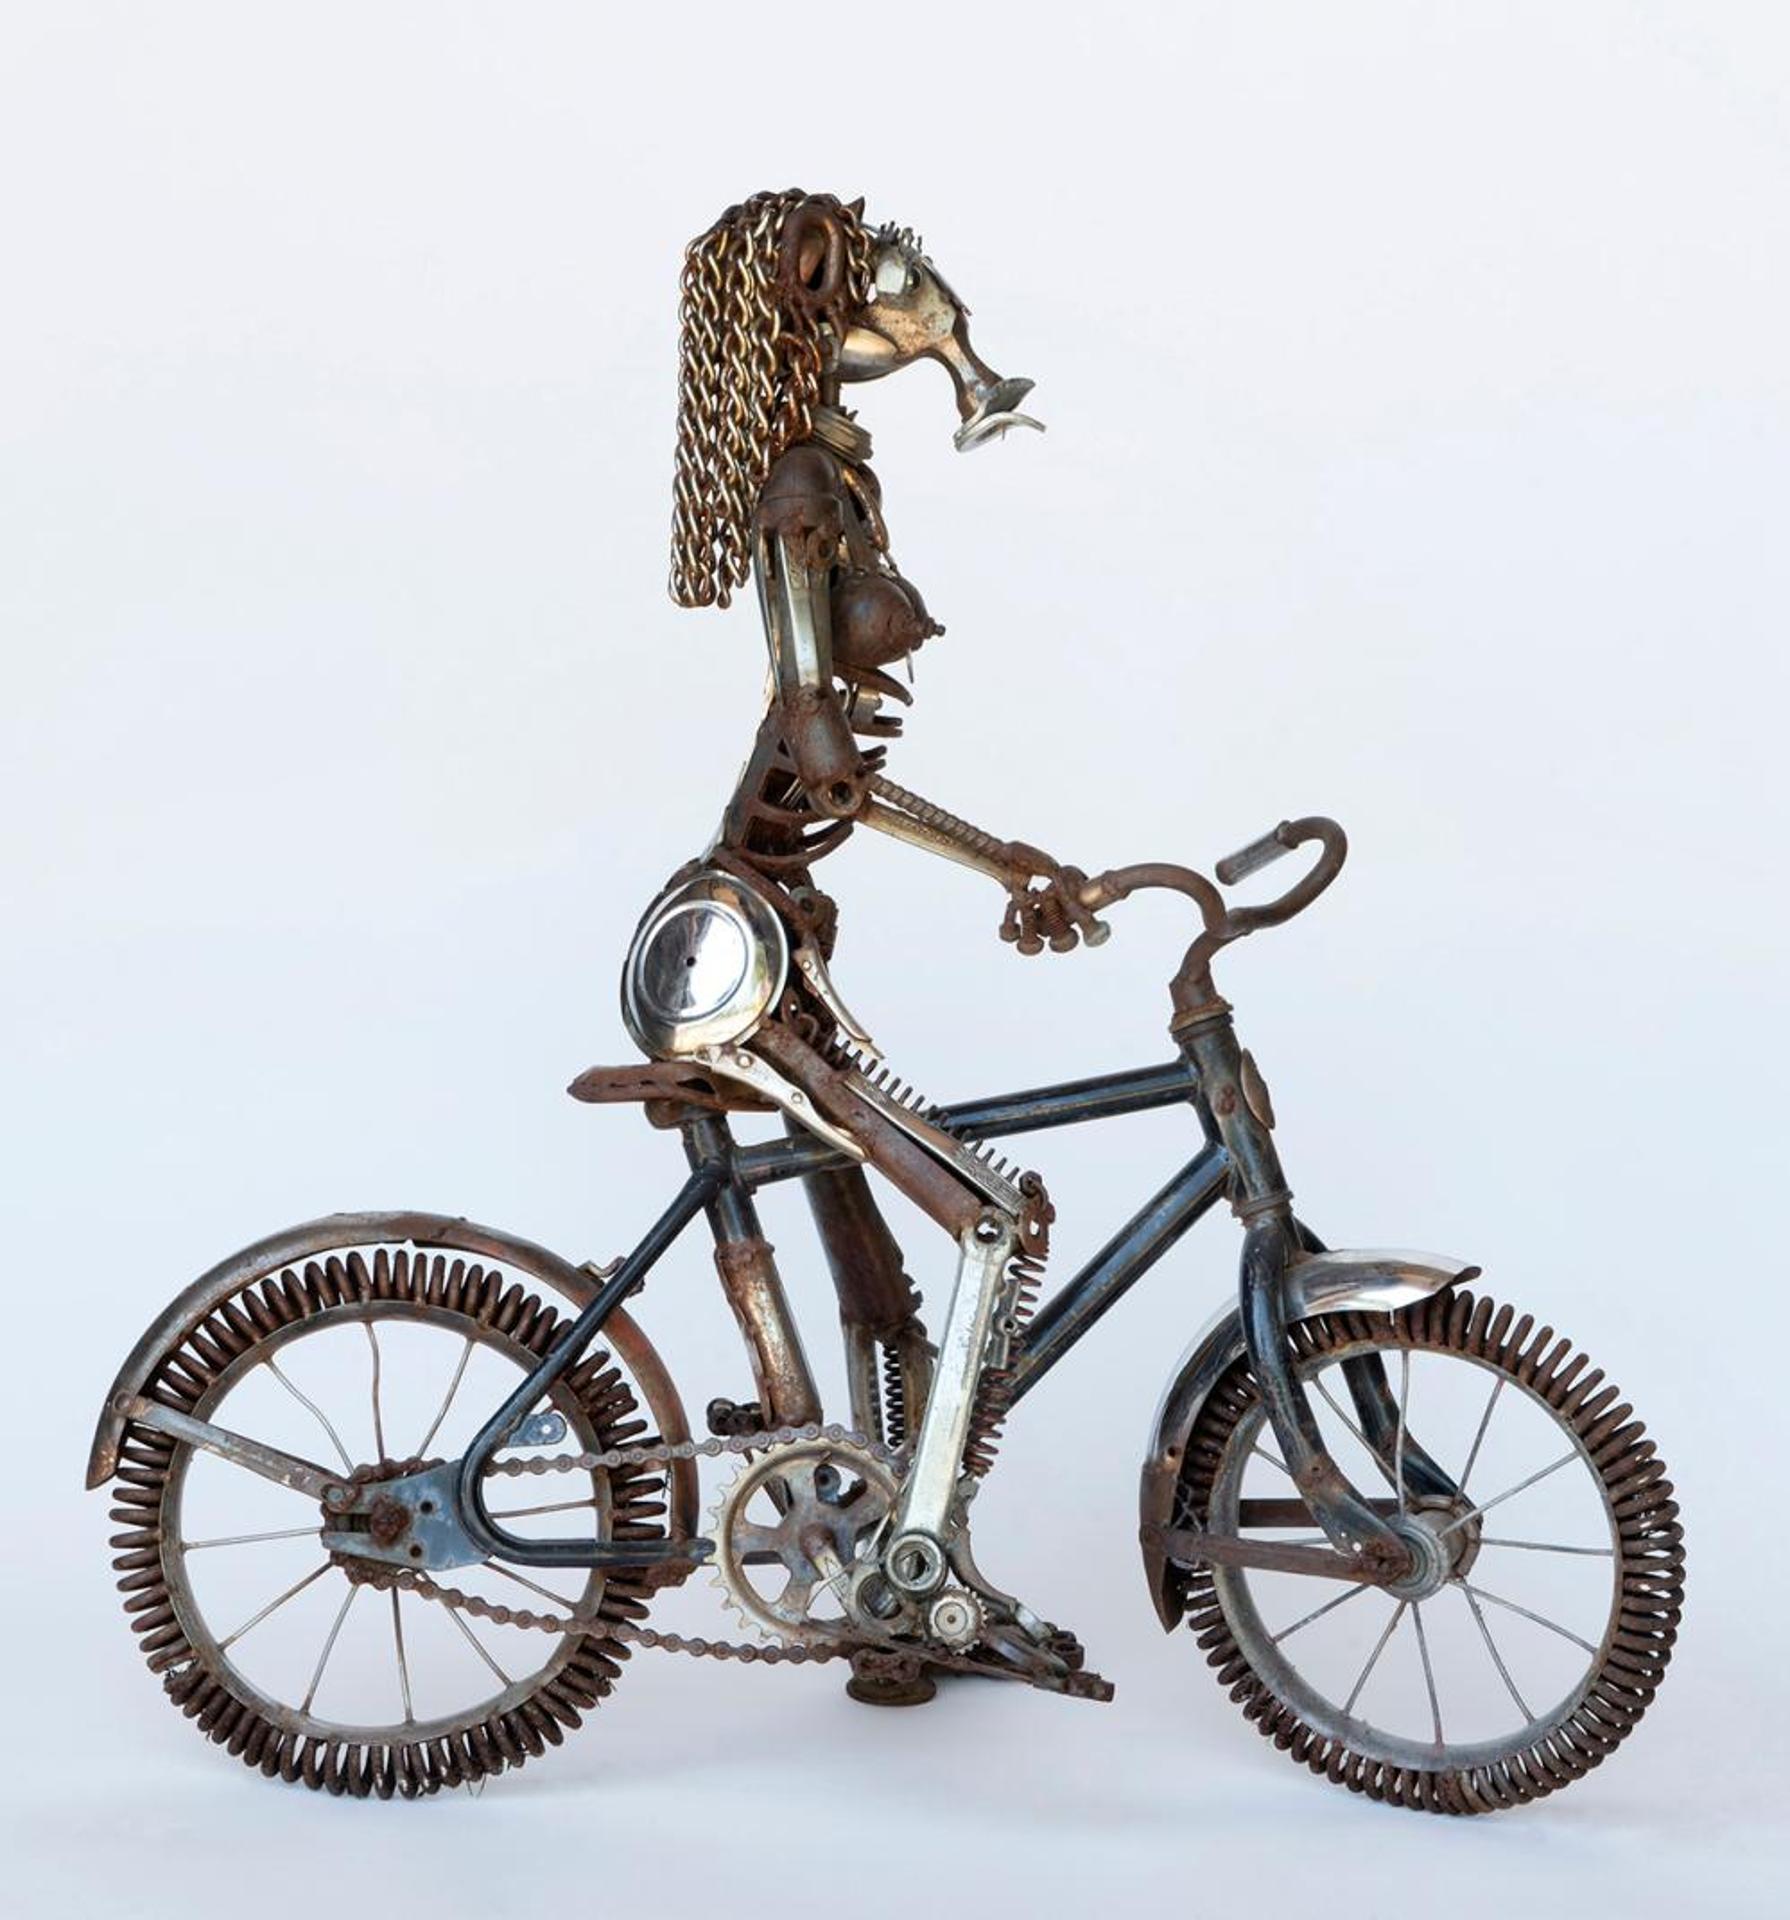 Jim Nodge - Figure on a Bicycle